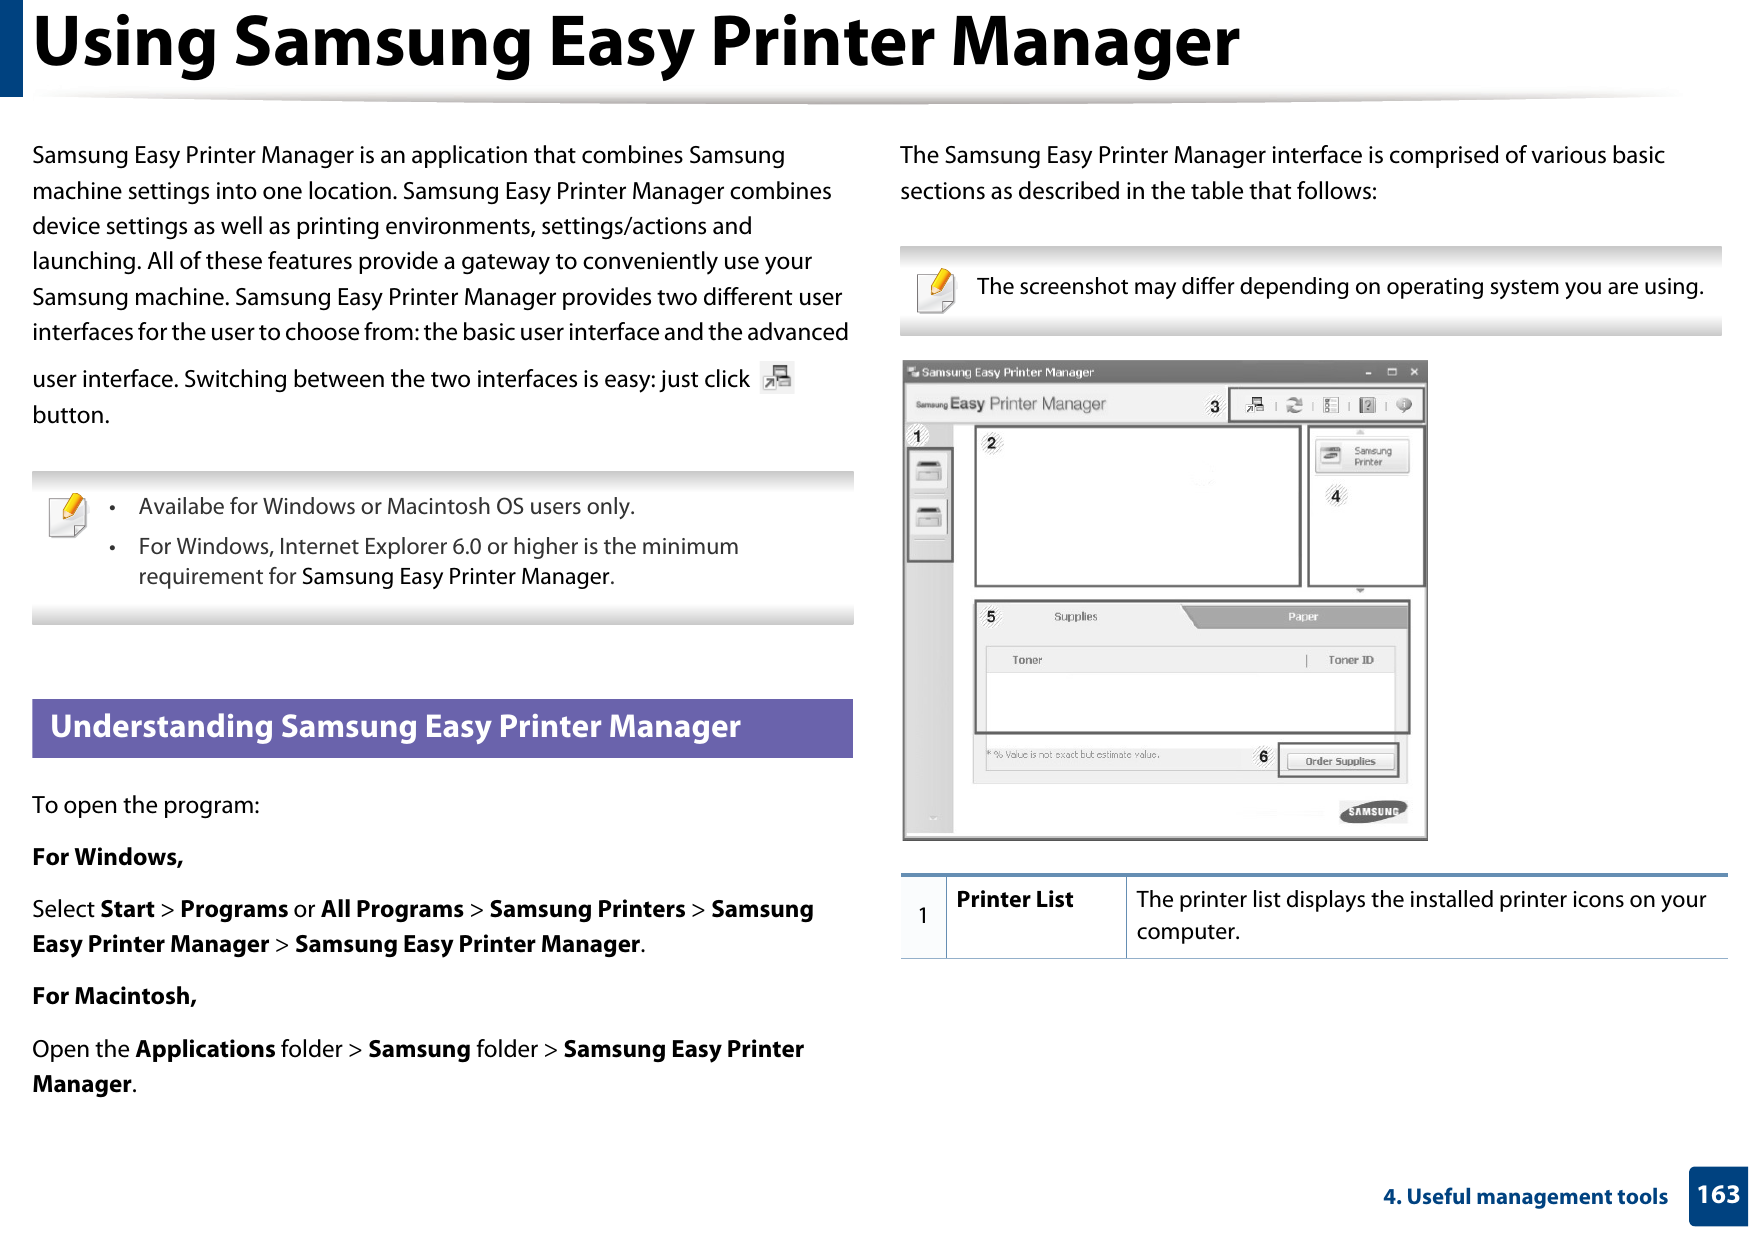 1634. Useful management toolsUsing Samsung Easy Printer ManagerSamsung Easy Printer Manager is an application that combines Samsung machine settings into one location. Samsung Easy Printer Manager combines device settings as well as printing environments, settings/actions and launching. All of these features provide a gateway to conveniently use your Samsung machine. Samsung Easy Printer Manager provides two different user interfaces for the user to choose from: the basic user interface and the advanced user interface. Switching between the two interfaces is easy: just click   button. • Availabe for Windows or Macintosh OS users only.• For Windows, Internet Explorer 6.0 or higher is the minimum requirement for Samsung Easy Printer Manager. 5 Understanding Samsung Easy Printer ManagerTo open the program: For Windows,Select Start &gt; Programs or All Programs &gt; Samsung Printers &gt; Samsung Easy Printer Manager &gt; Samsung Easy Printer Manager.For Macintosh,Open the Applications folder &gt; Samsung folder &gt; Samsung Easy Printer Manager.The Samsung Easy Printer Manager interface is comprised of various basic sections as described in the table that follows: The screenshot may differ depending on operating system you are using. 1Printer List The printer list displays the installed printer icons on your computer.